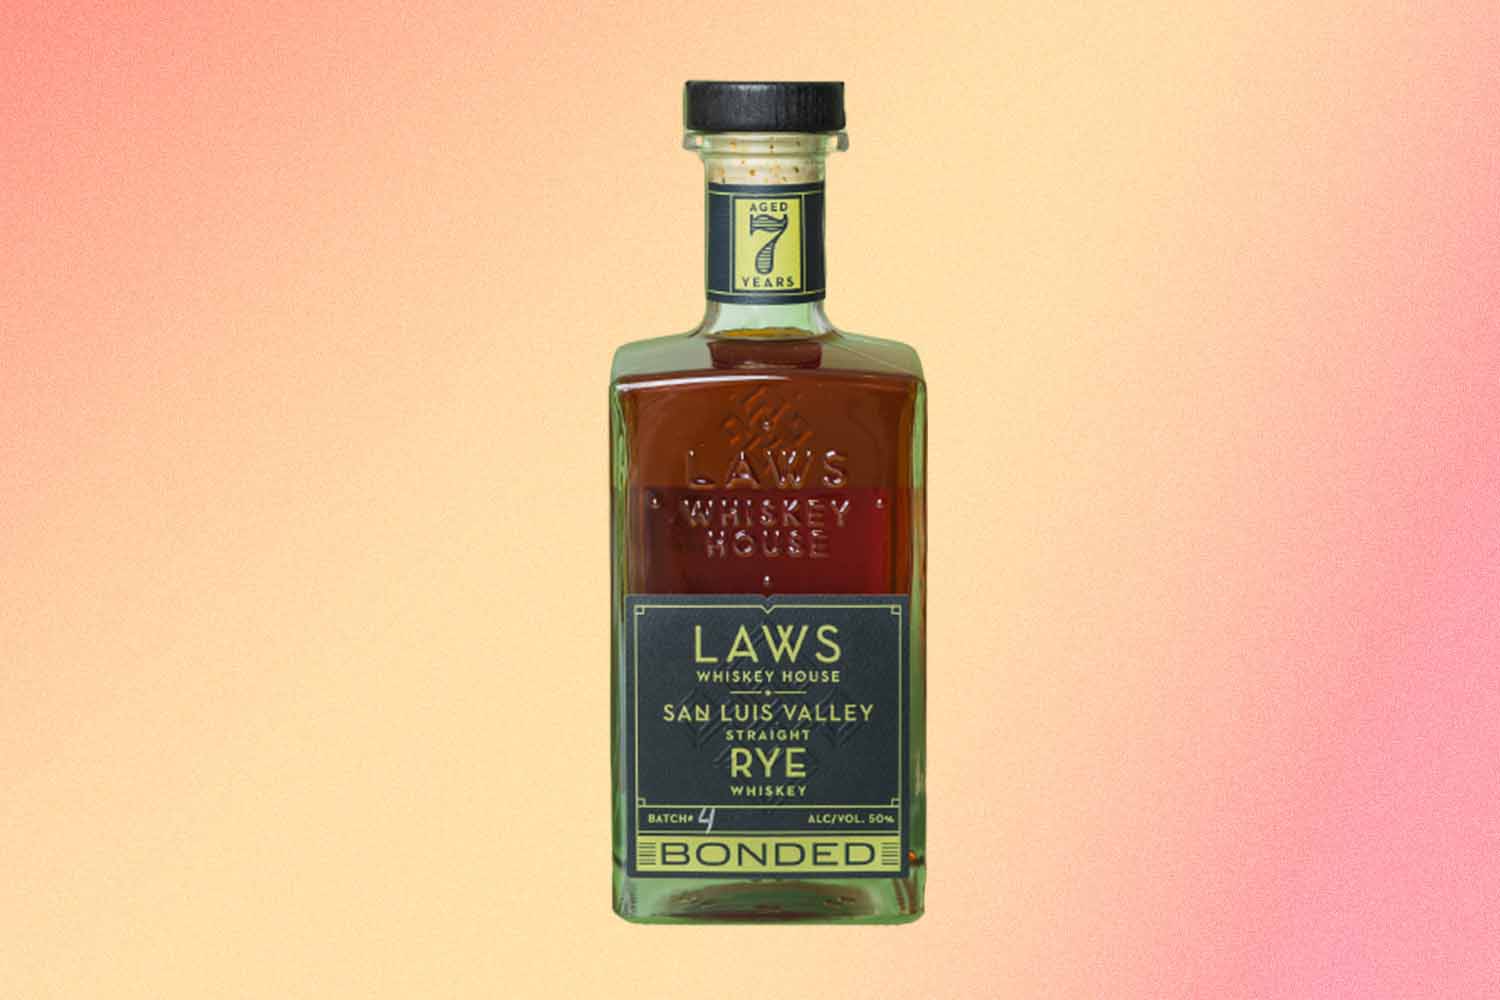 Laws Whiskey House San Luis Valley Bottled-in-Bond Rye